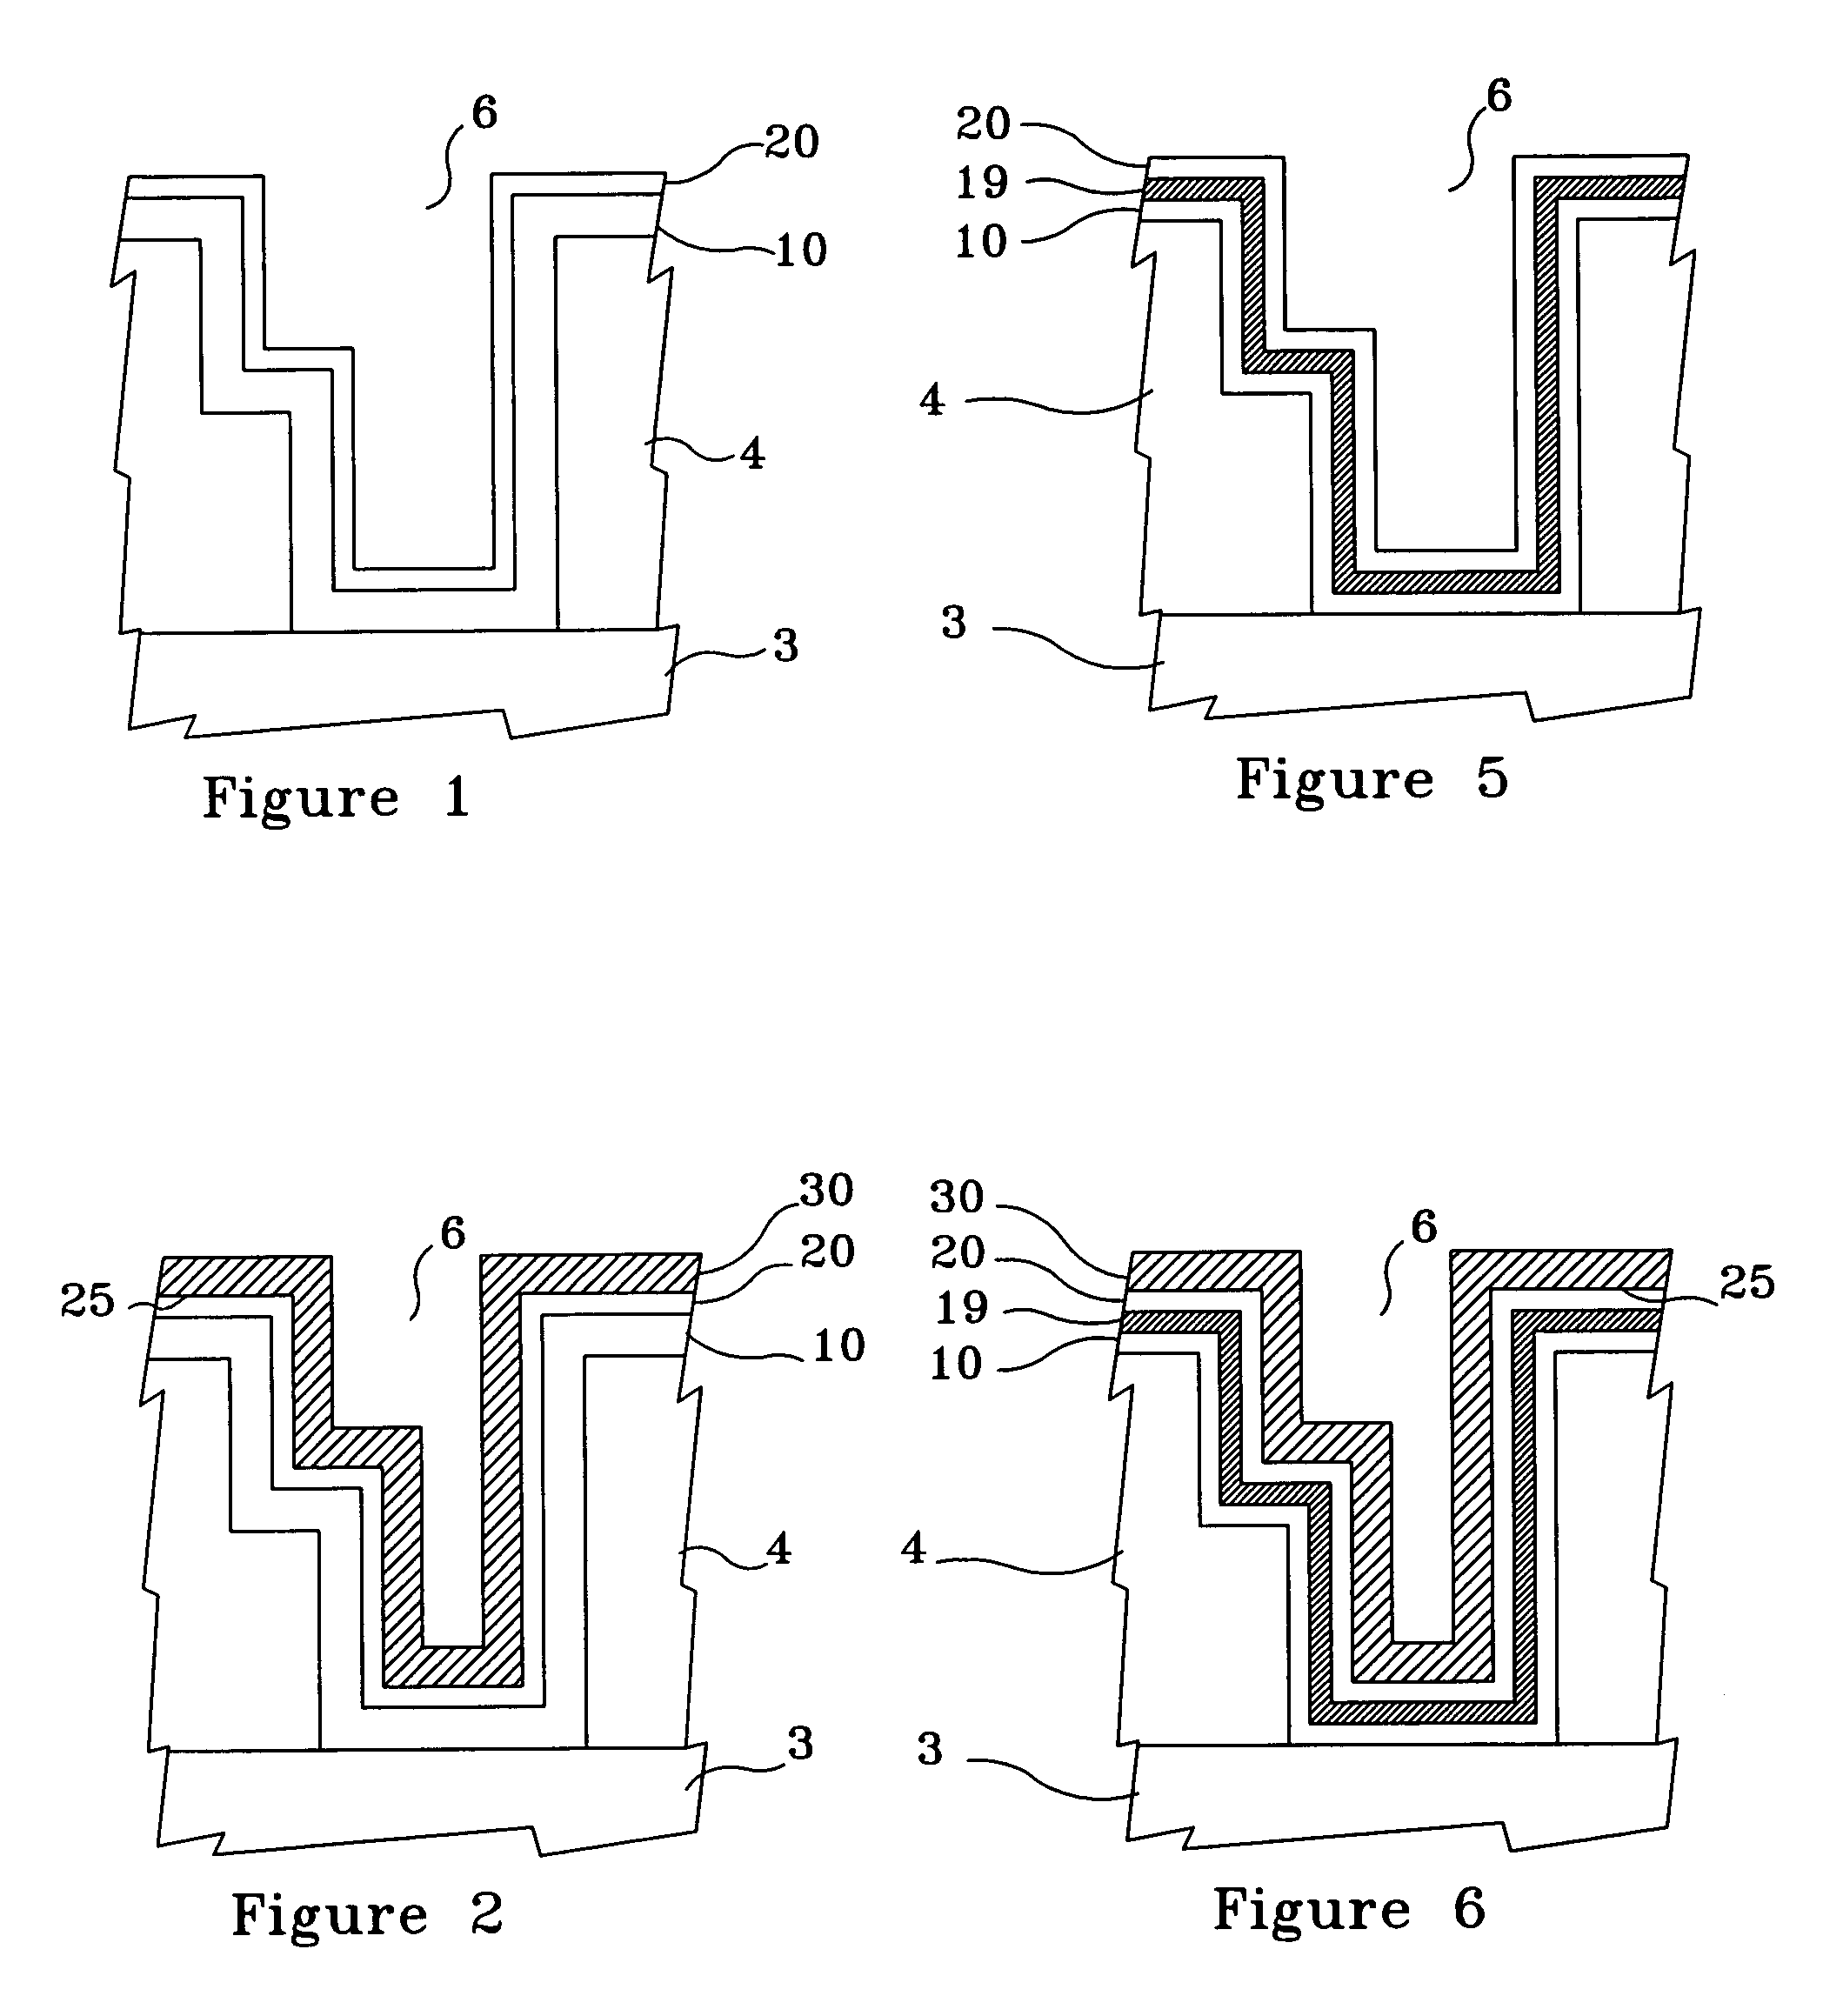 Semiconductor device having copper lines with reduced electromigration using an electroplated interim copper-zinc alloy film on a copper surface